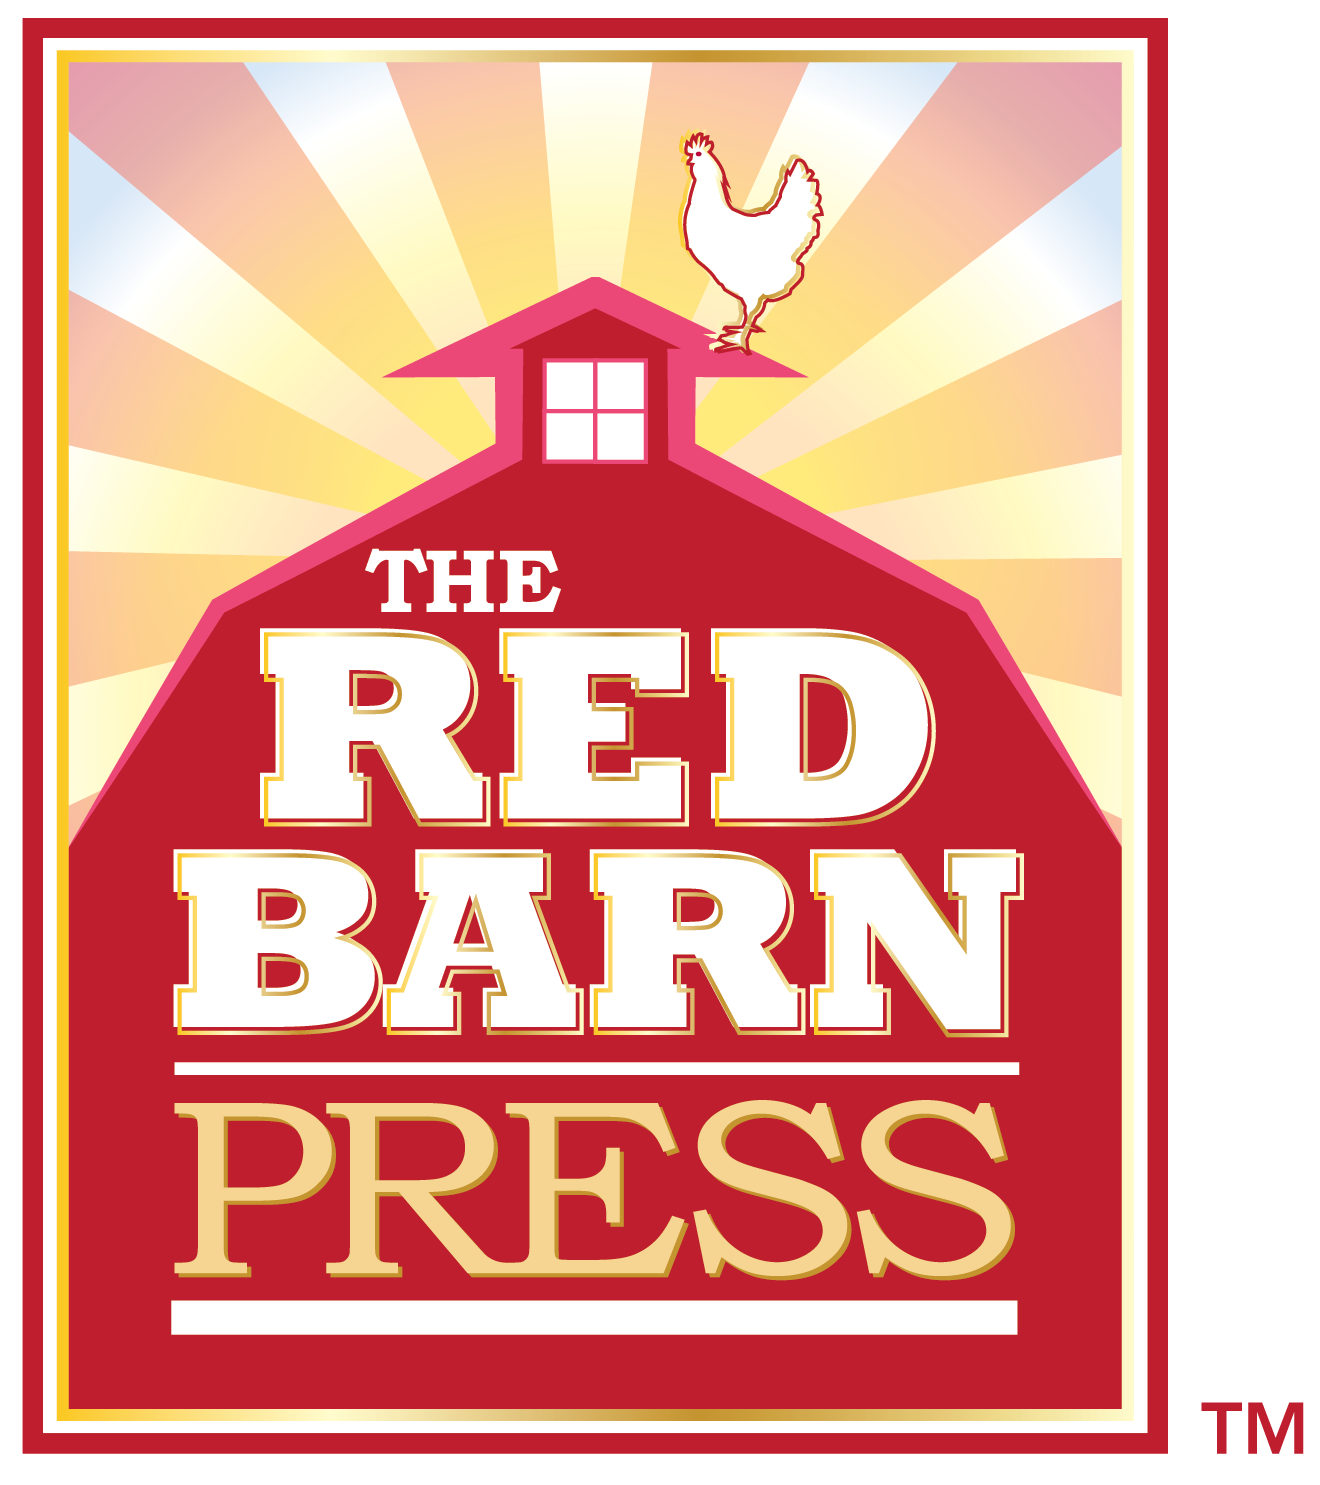 The Red Barn Press